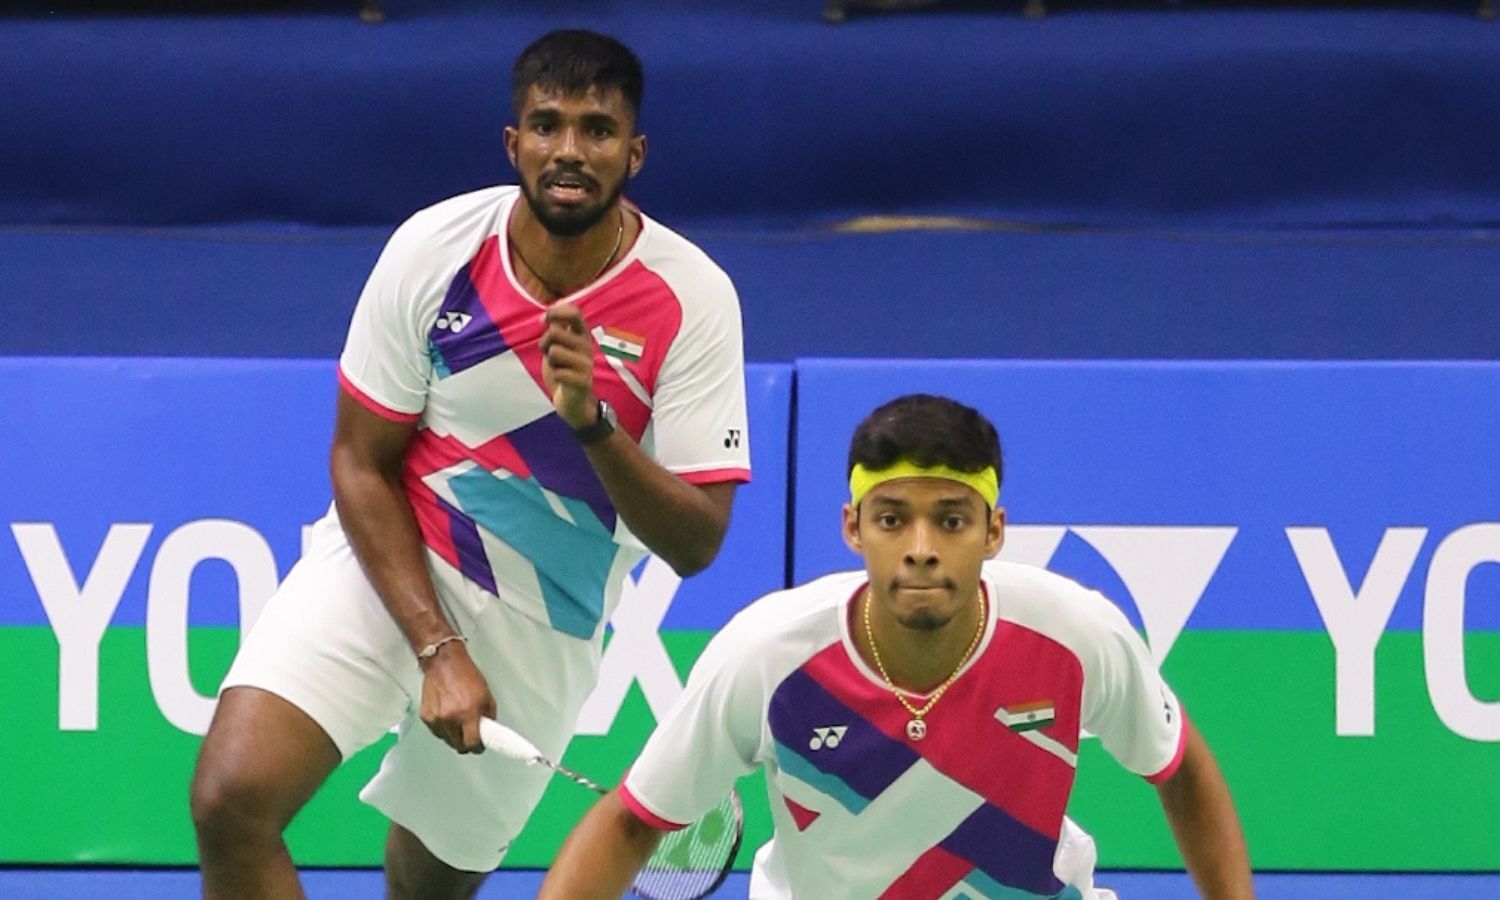 Satwik-Chirag face off in opposition to World Champion’s brother in quarters